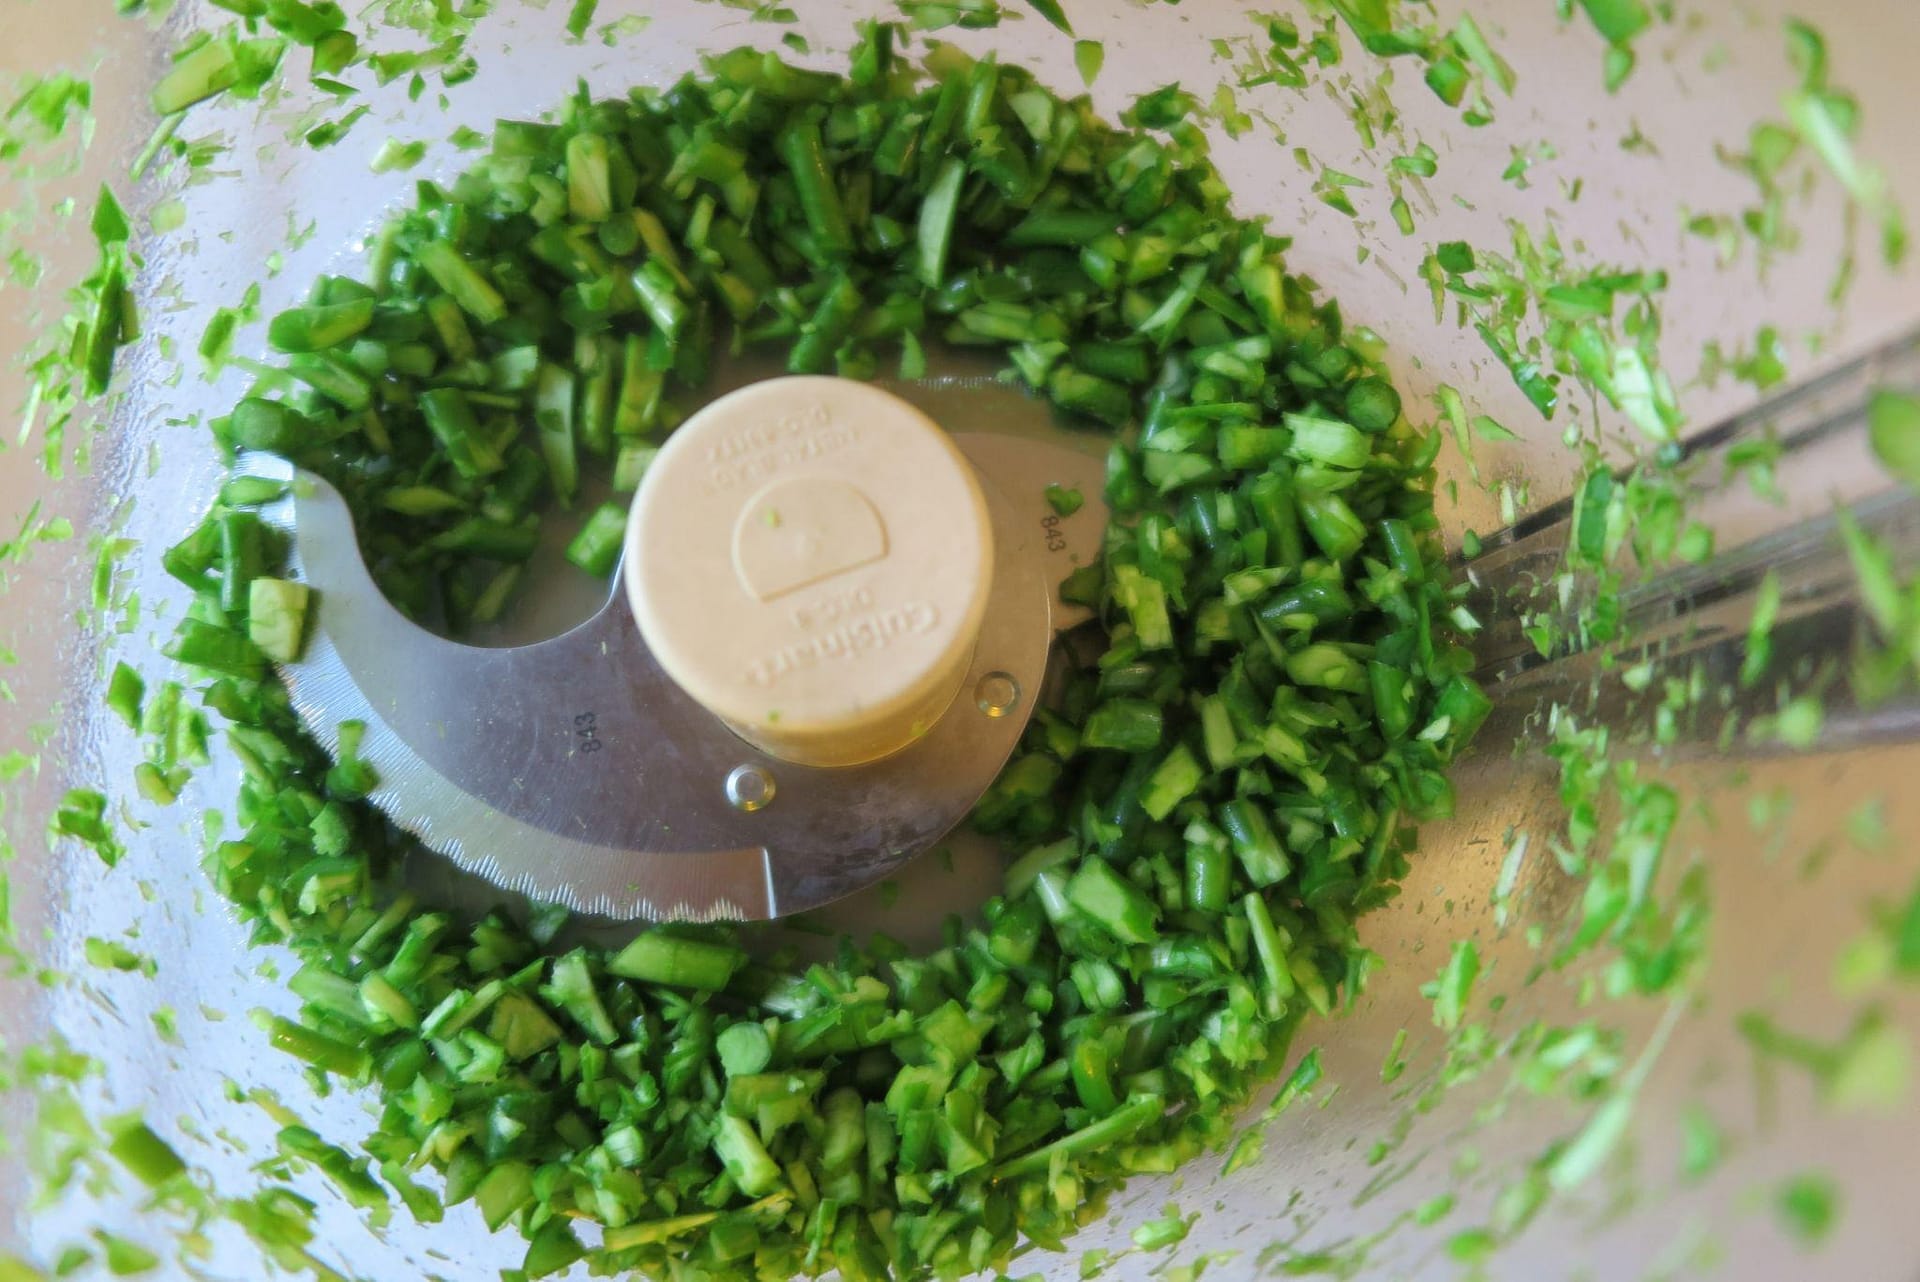 Roughly blended garlic scapes in a food processor